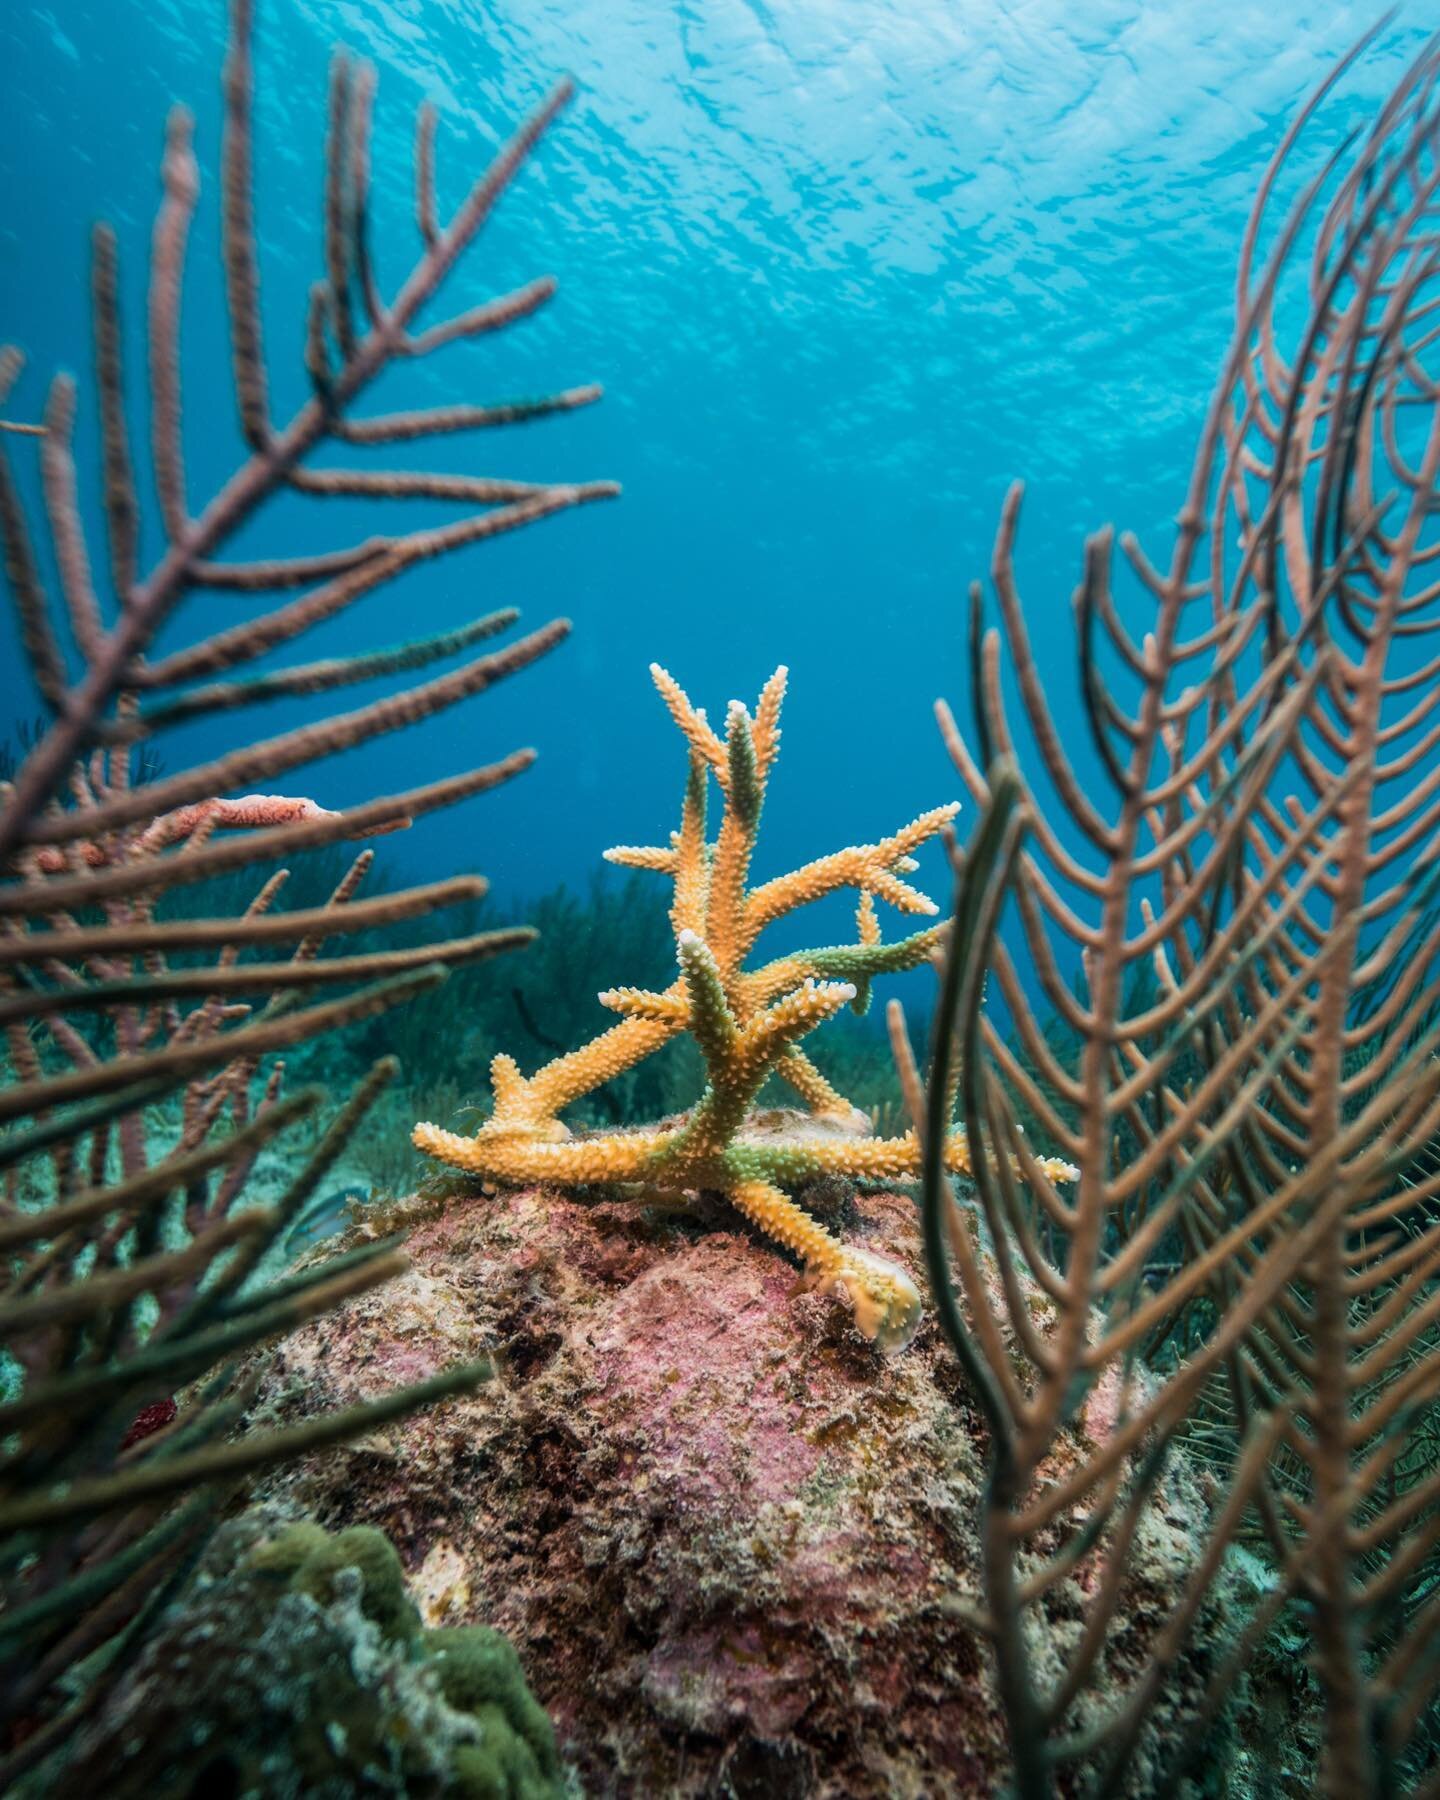 A champion staghorn coral settling well on the reef!
.
@maigarmendia from @coralisma_mx travelled to Playa del Carmen to pay a visit to the corals we outplanted together on the reef in March
.
Even though most corals are doing well and growing fast, 